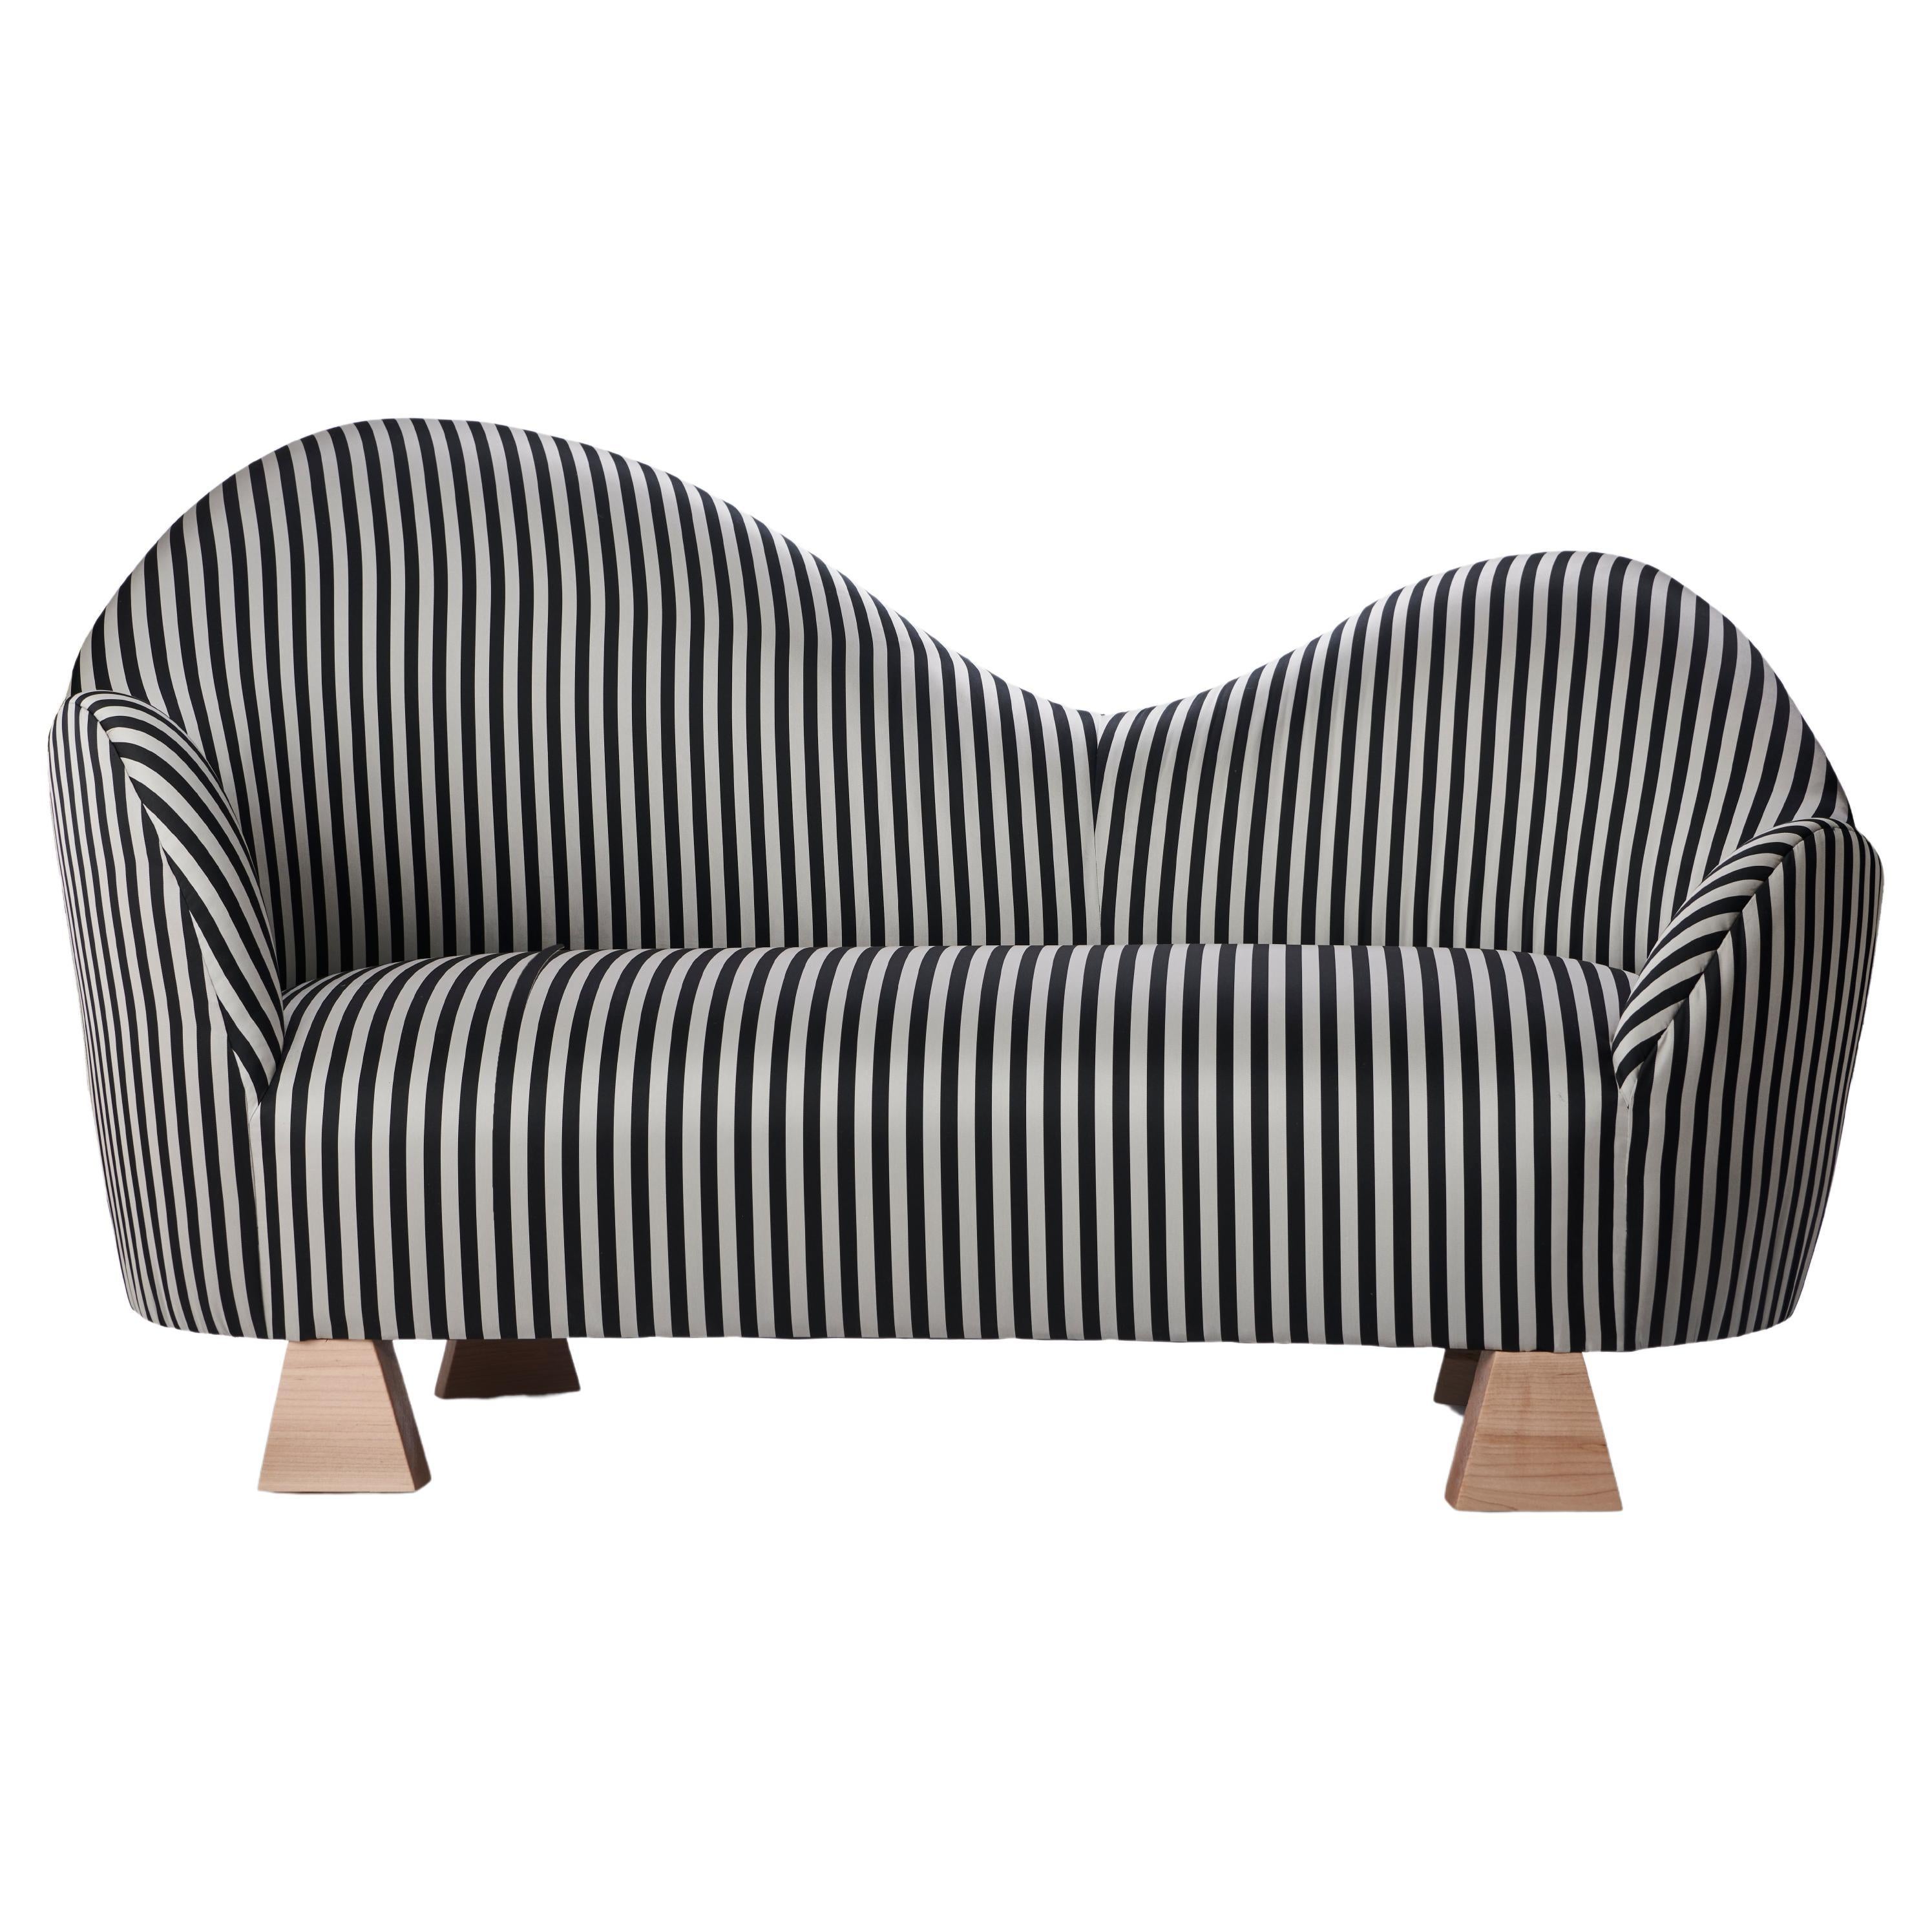 Lorette Settee, Stripe Silk & Natural Wood Settee by Christian Siriano For Sale